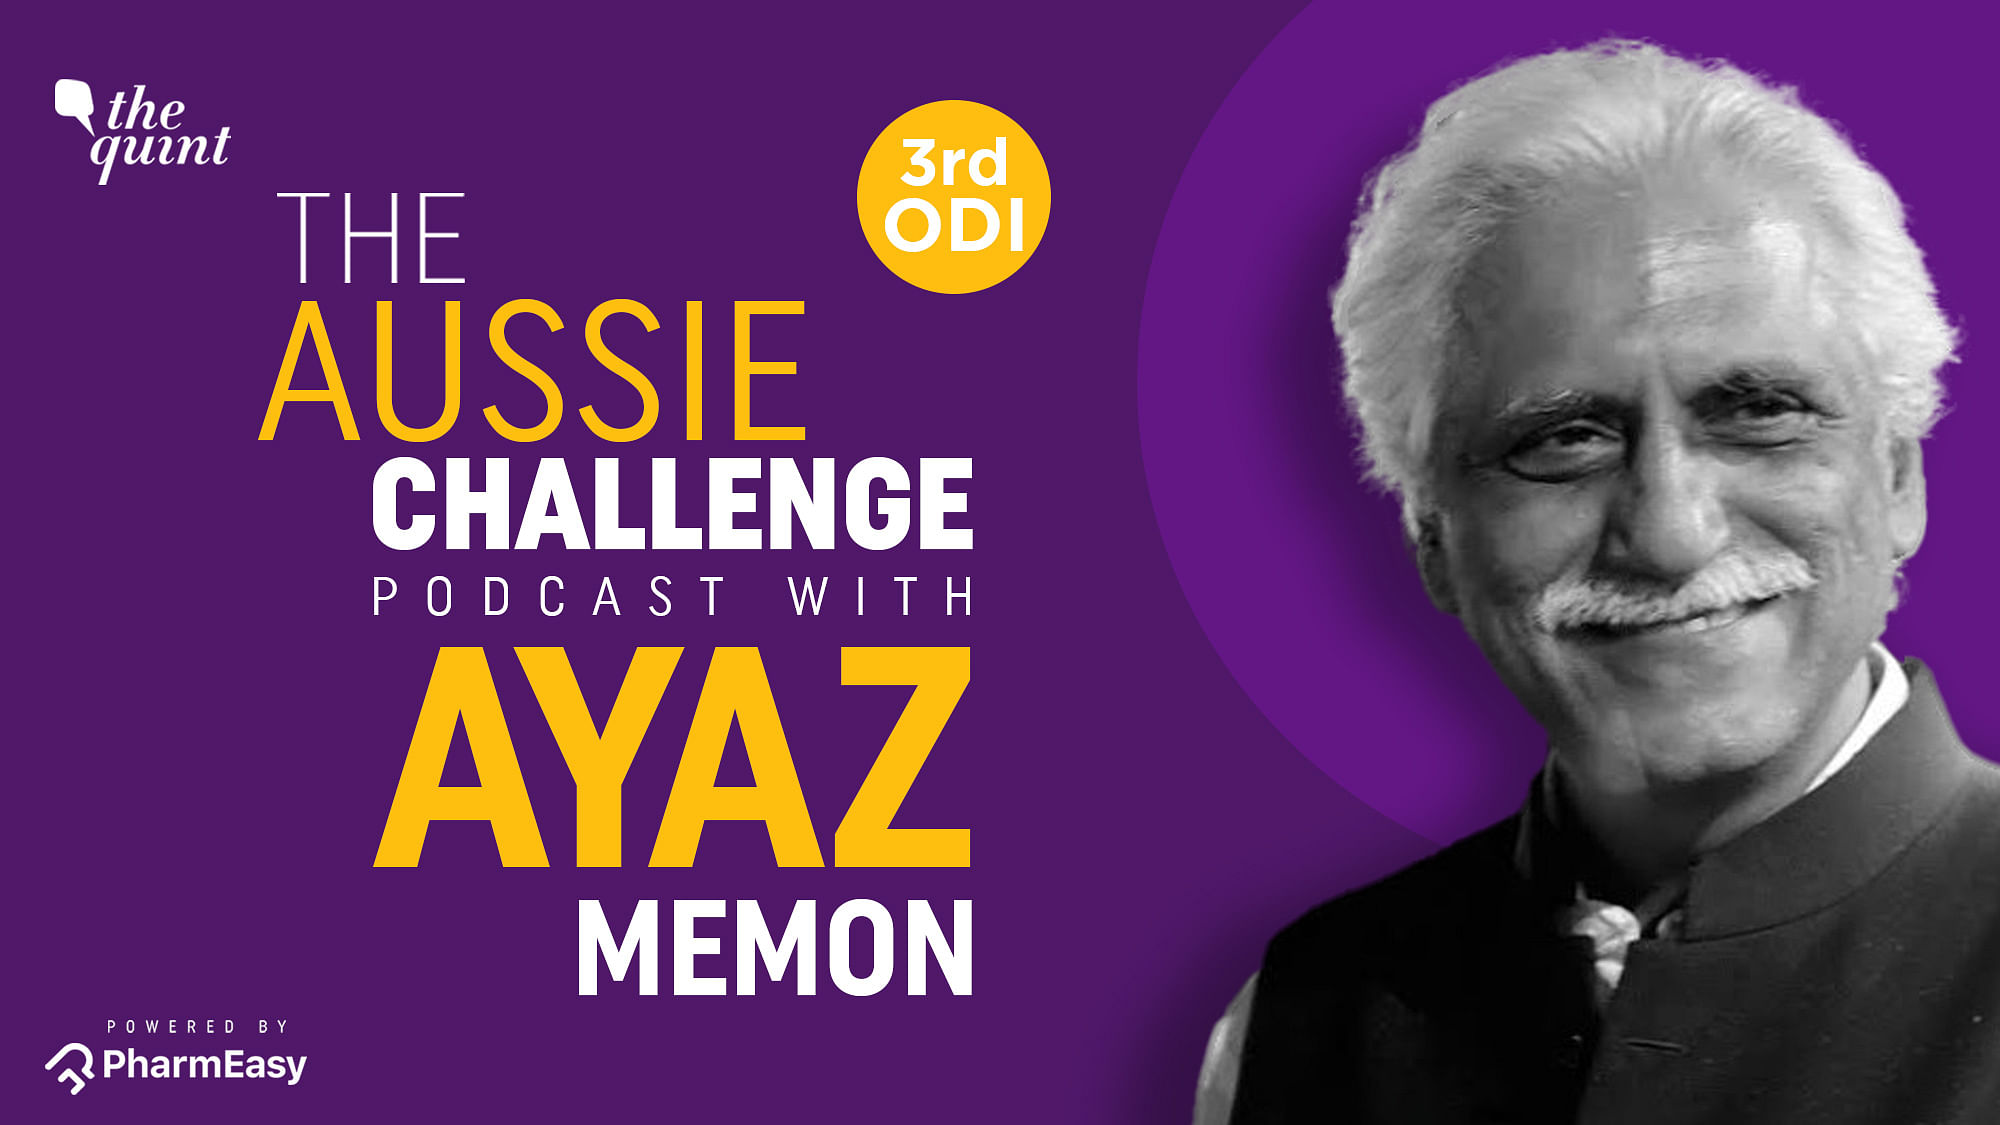 On Episode 3 of The Aussie Podcast, Ayaz Memon talks about India’s 13-run win over Australia in the third ODI at Canberra.